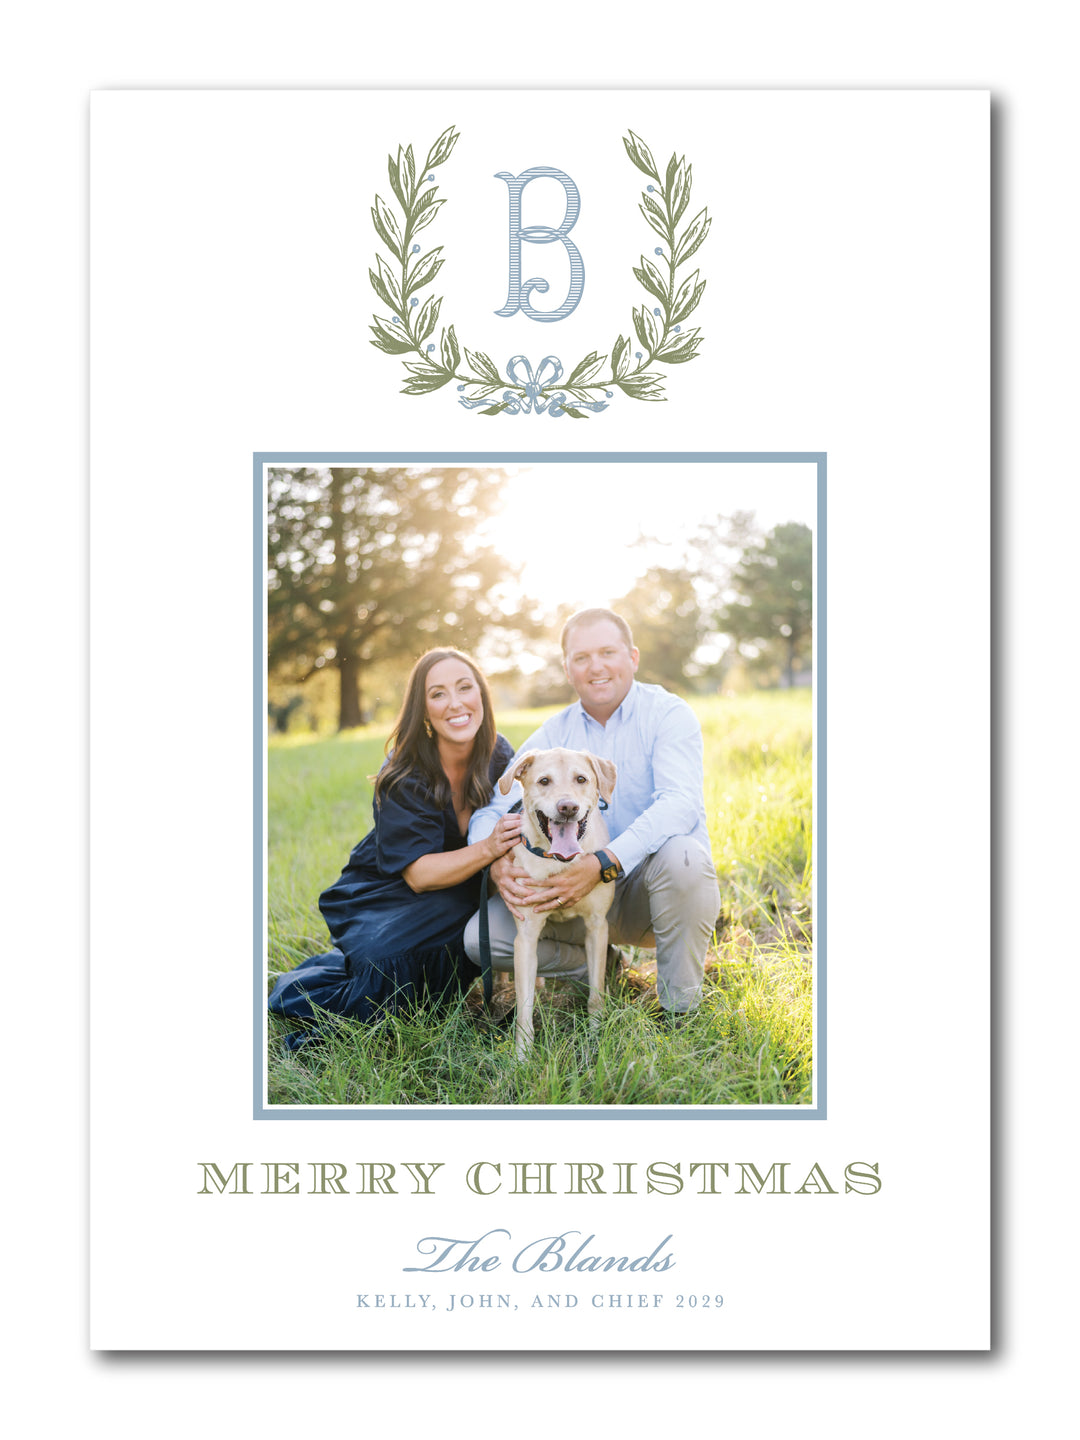 The Chief Christmas Card